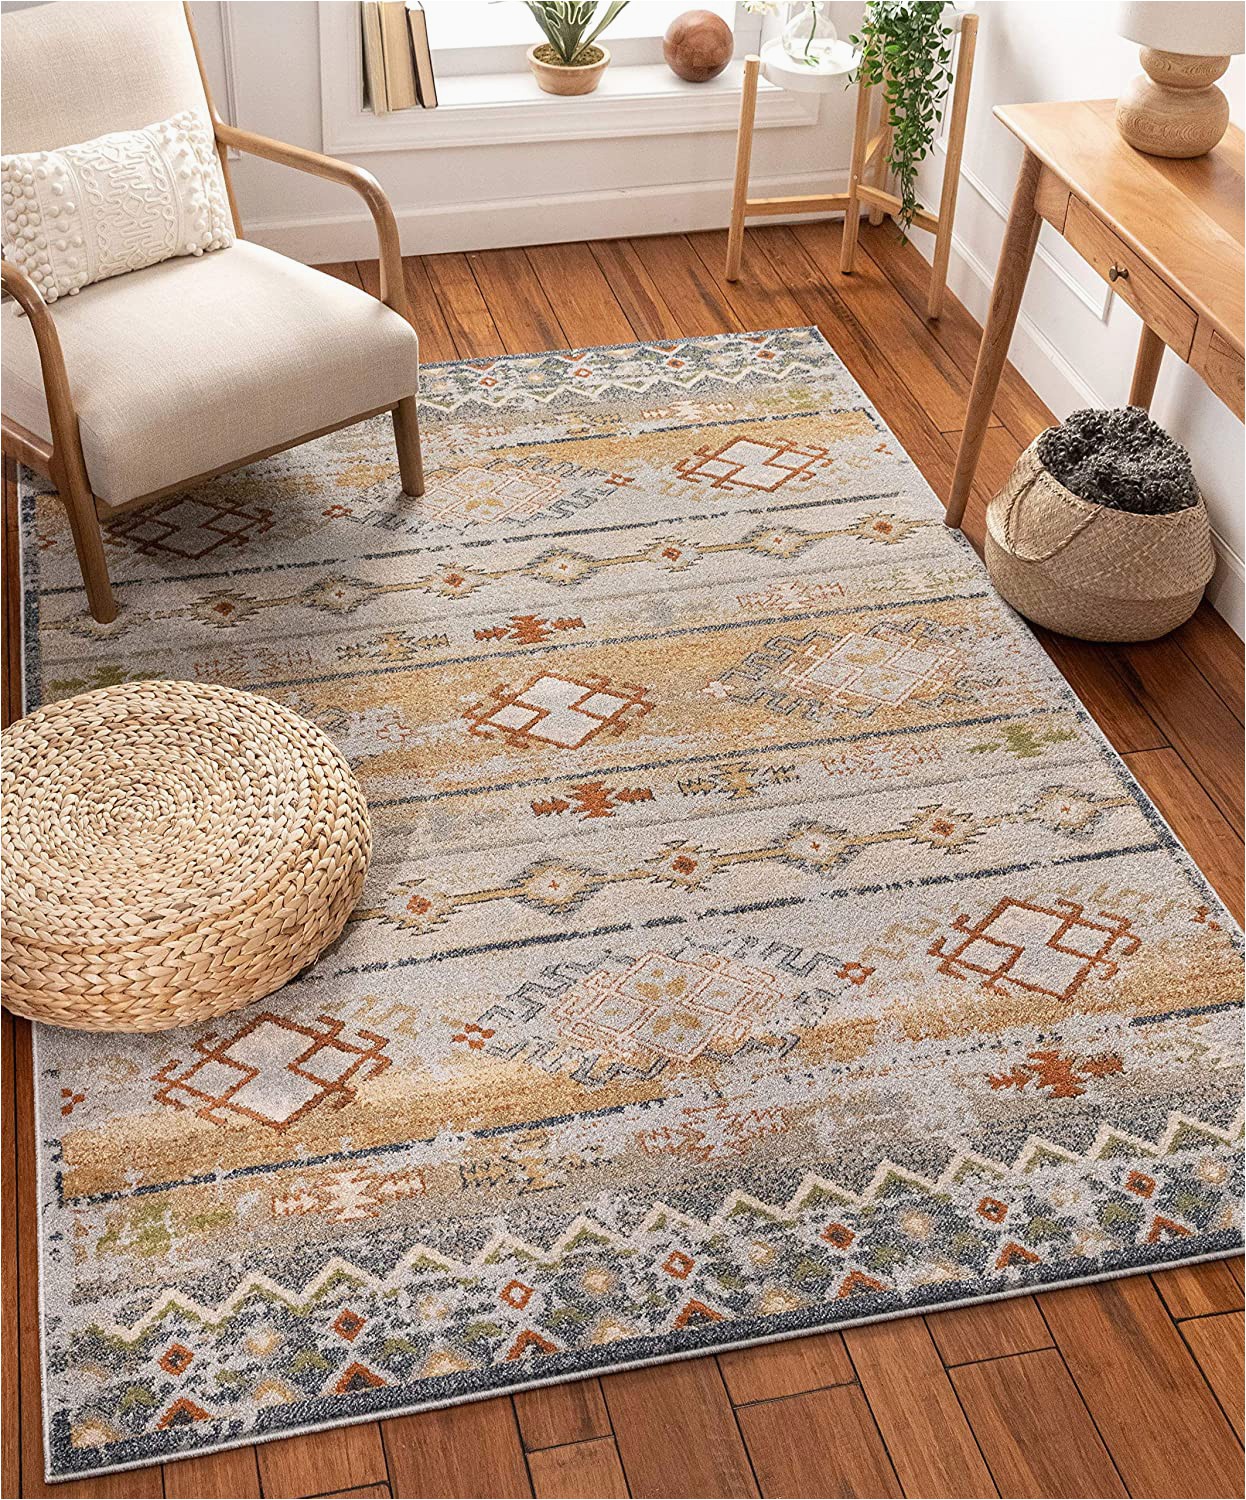 Bed Bath and Beyond Rugs 9×12 Well Woven Elu Cream Vintage Panel Pattern area Rug 8×11 7 10" X 10 6"